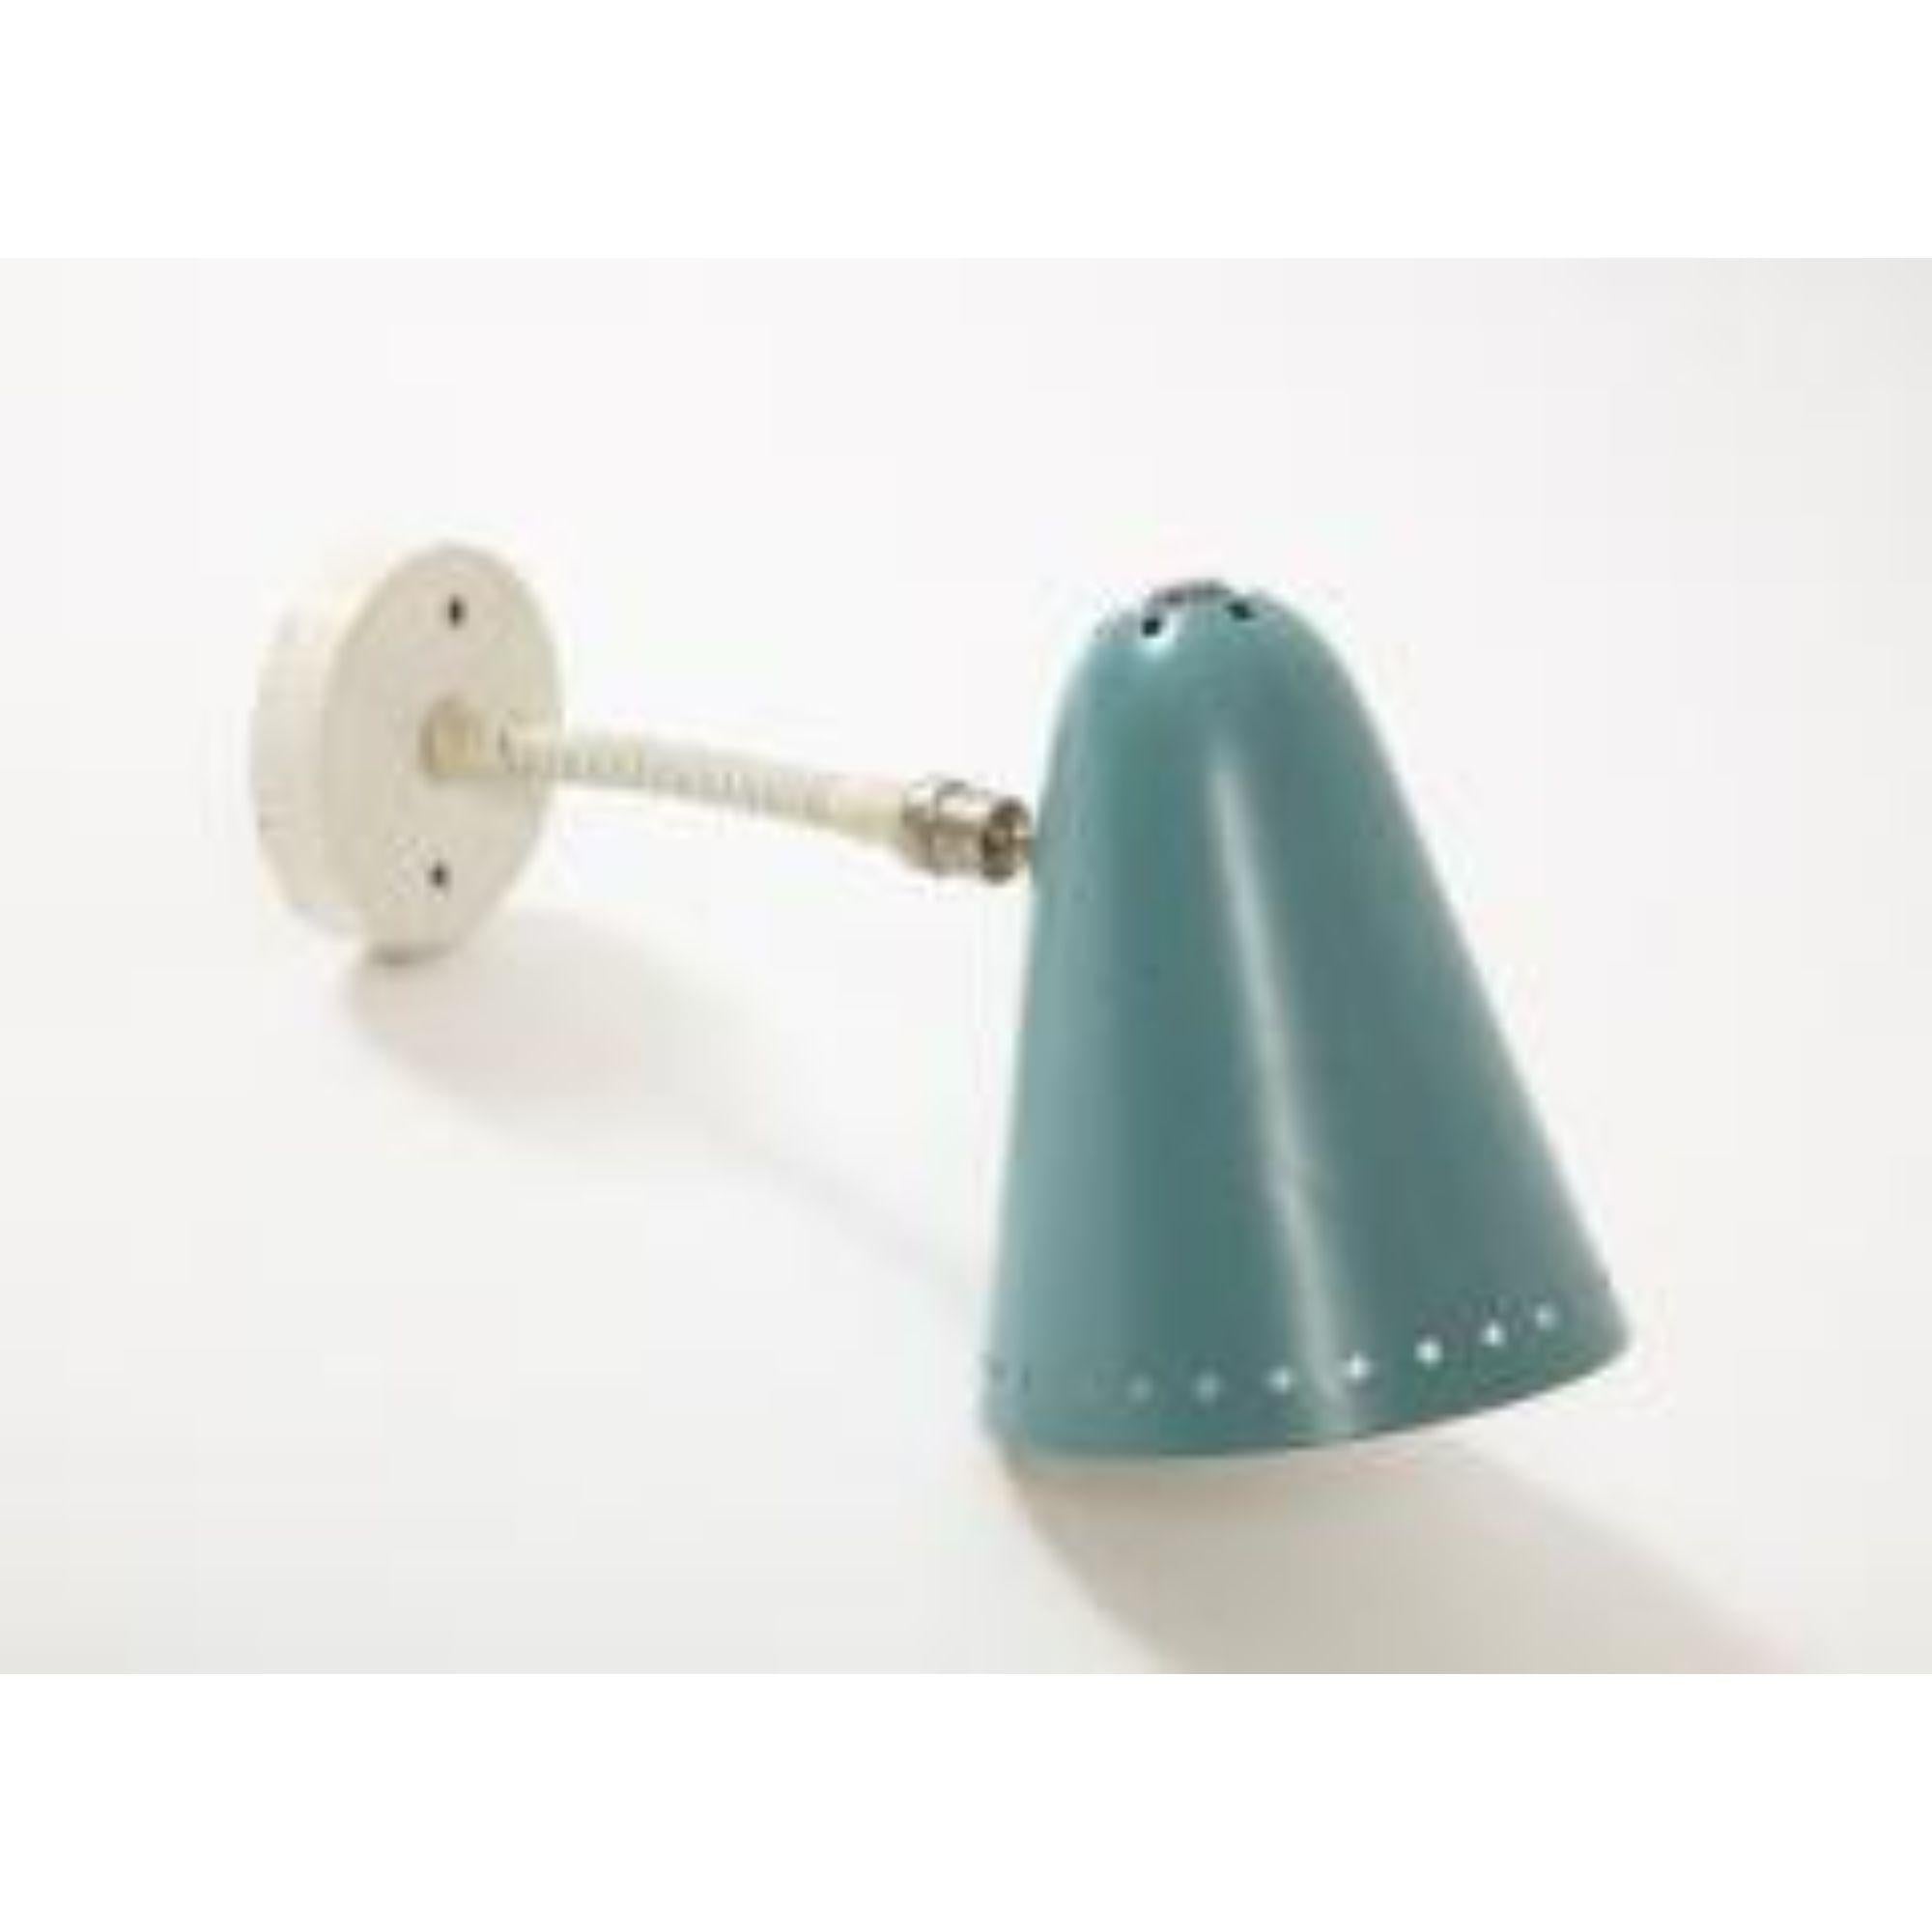 Small, playful wall light in a beautifully patinated robin egg blue with punched-out star detailing around the opening.

